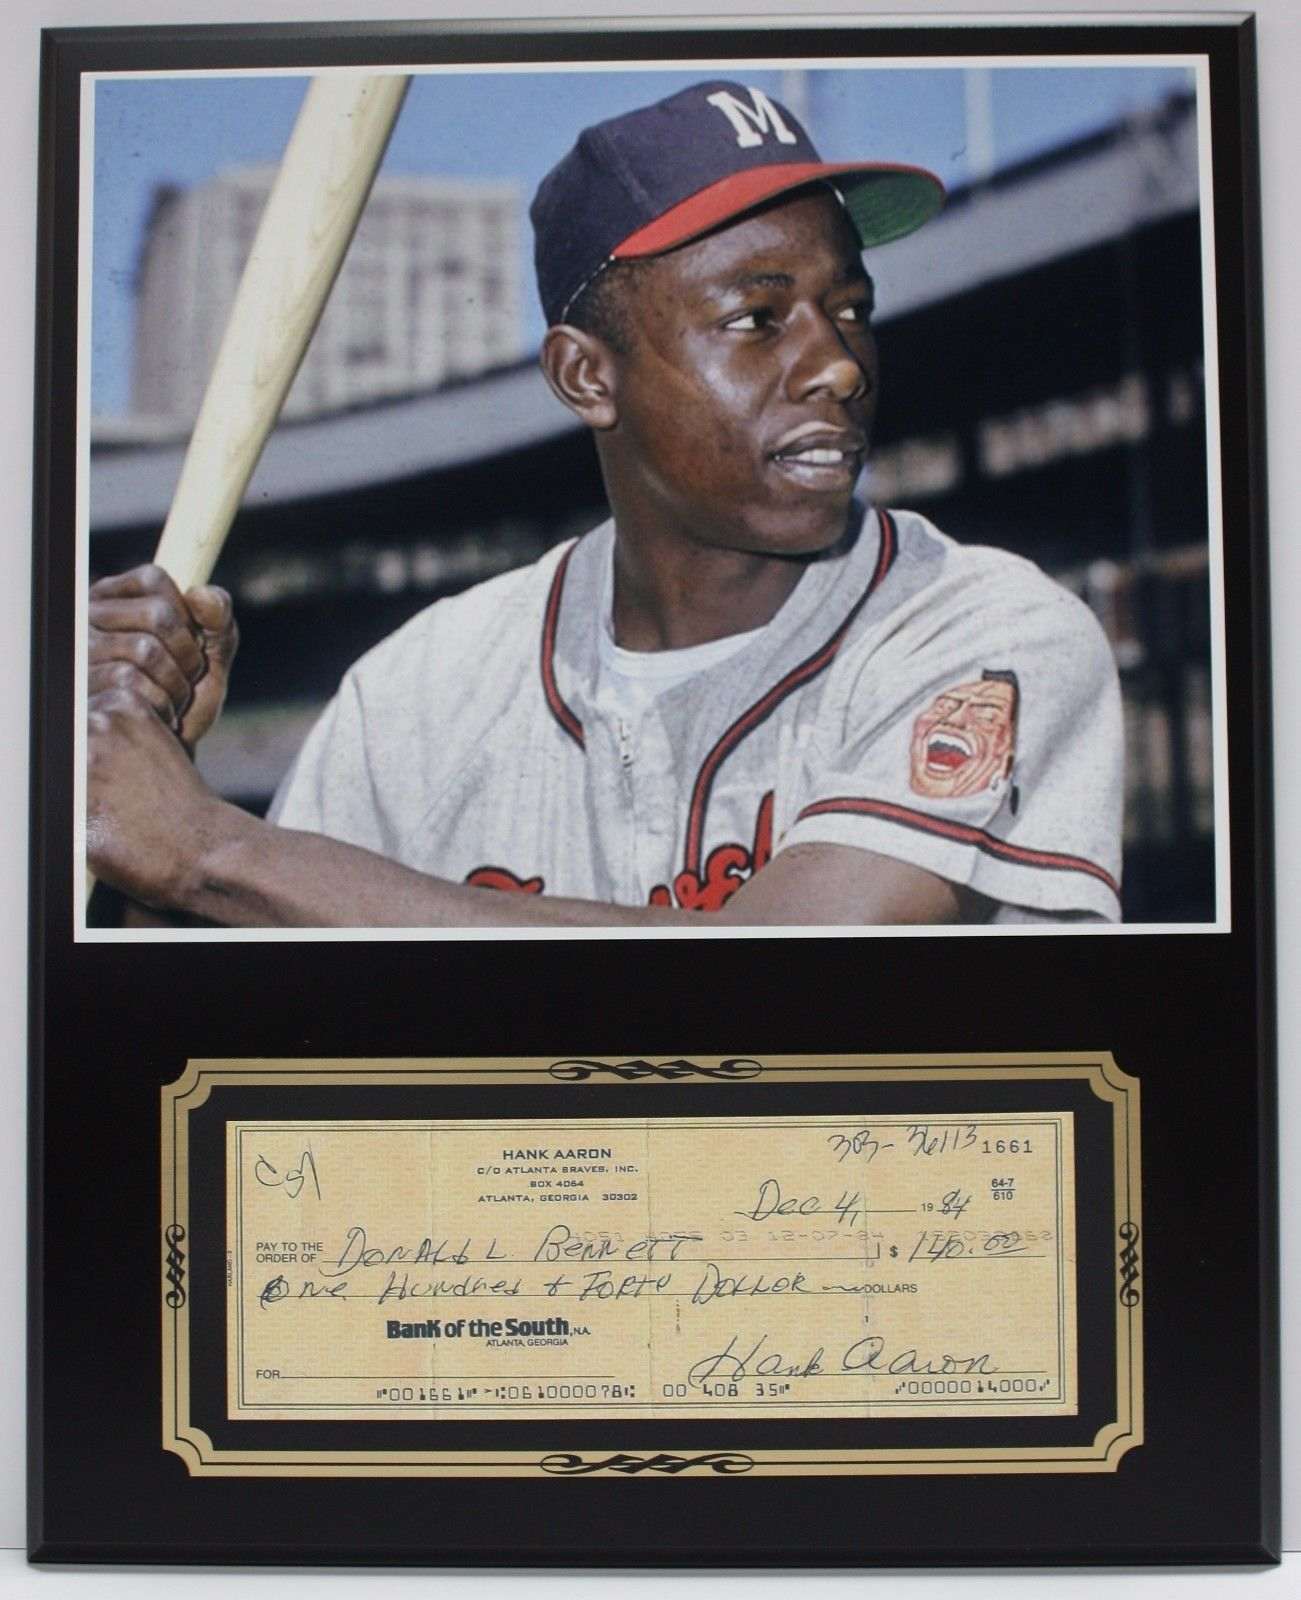 Hank Aaron Baseball Player Reproduction Signed Limited Edition